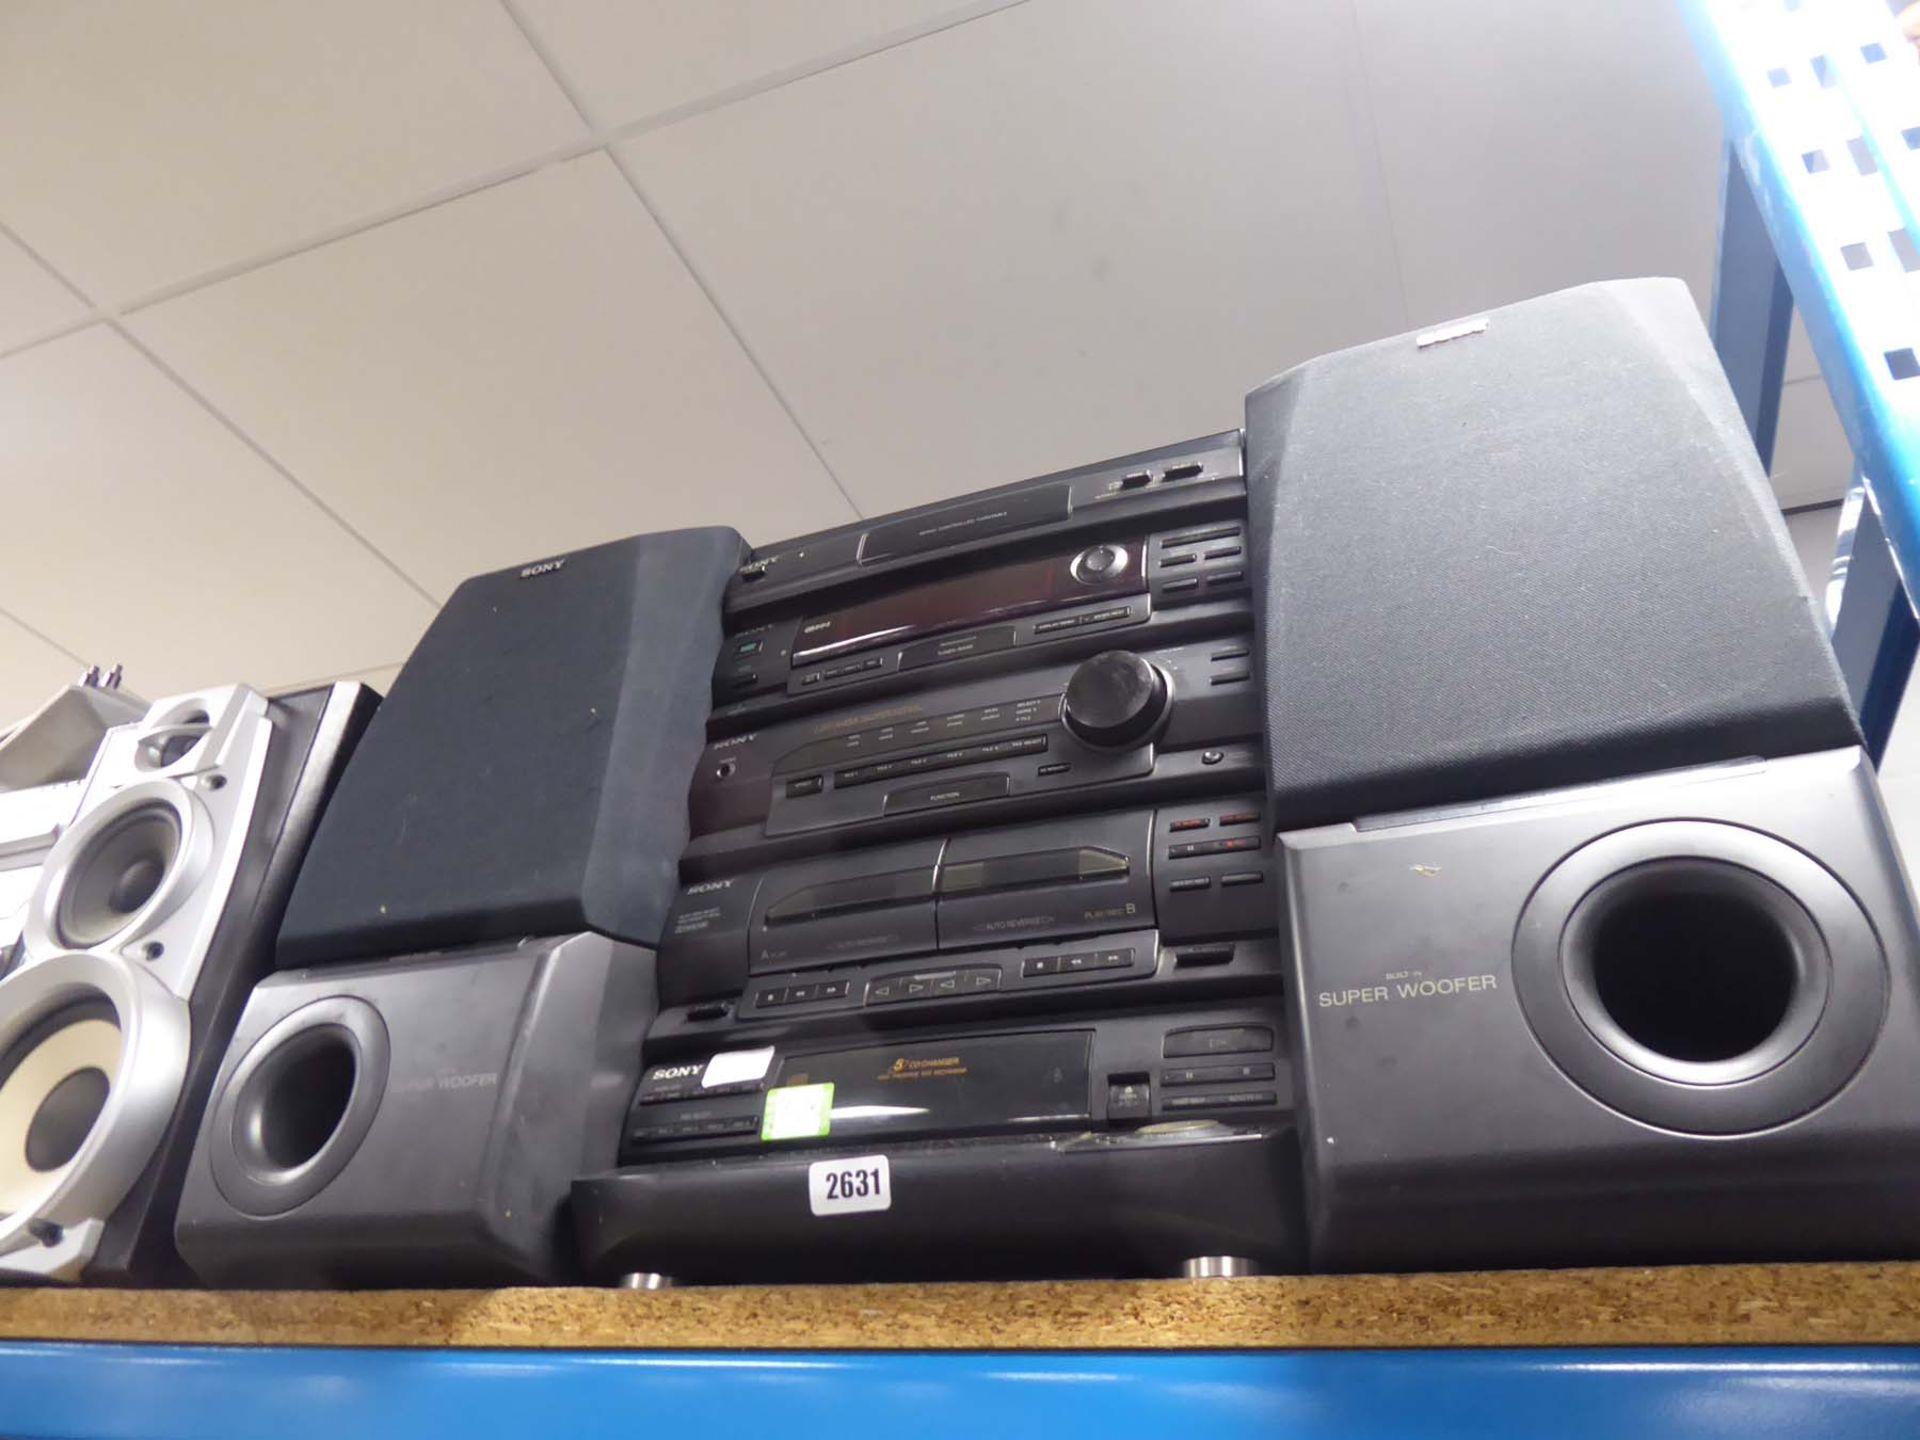 TN76. Sony multi stack hi-fi system with subwoofer speakers